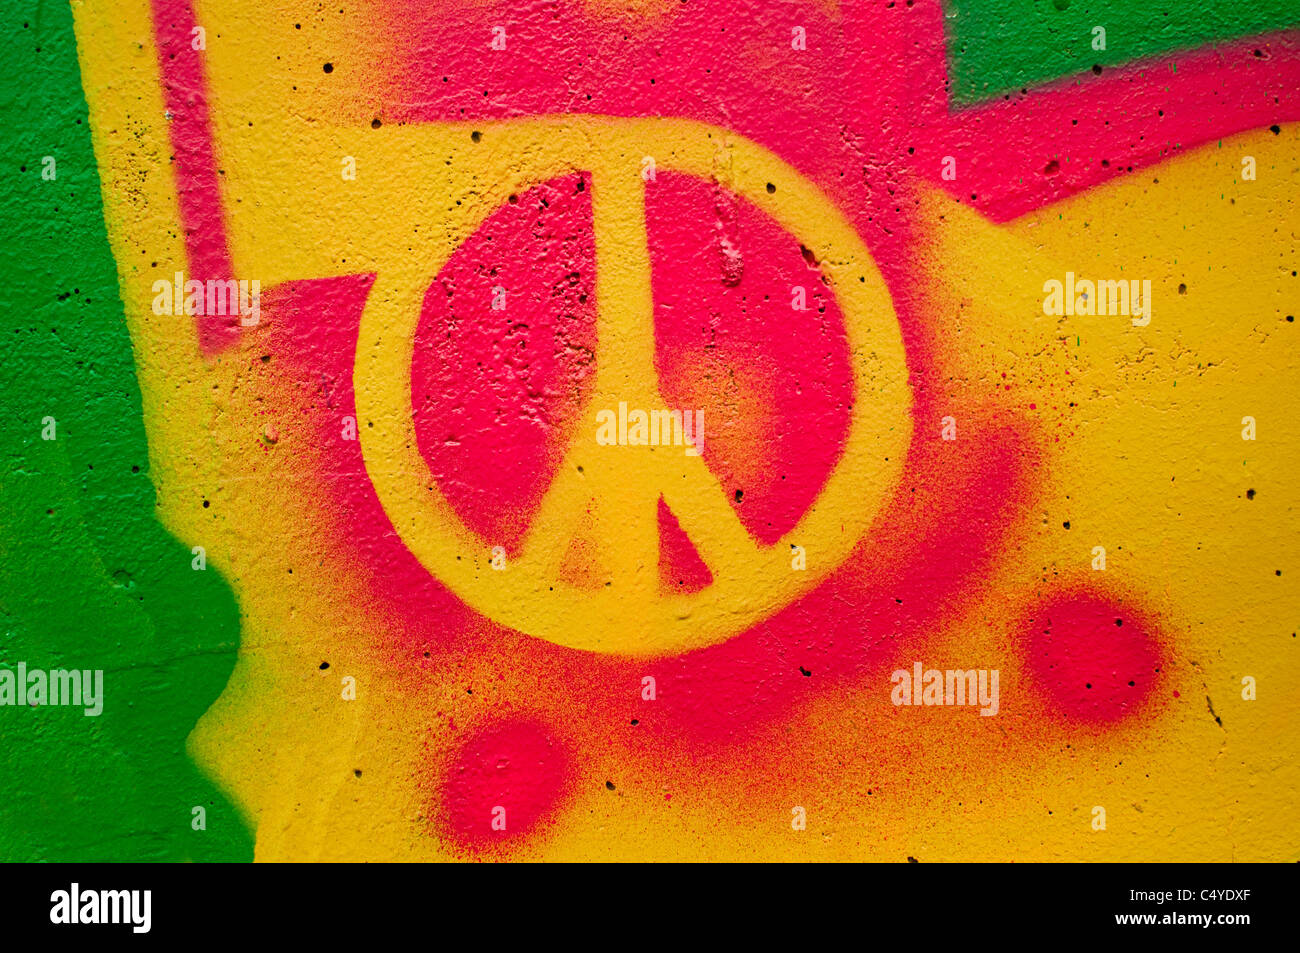 Highly detailed close up image of a grunge peace sign graffiti. Stock Photo